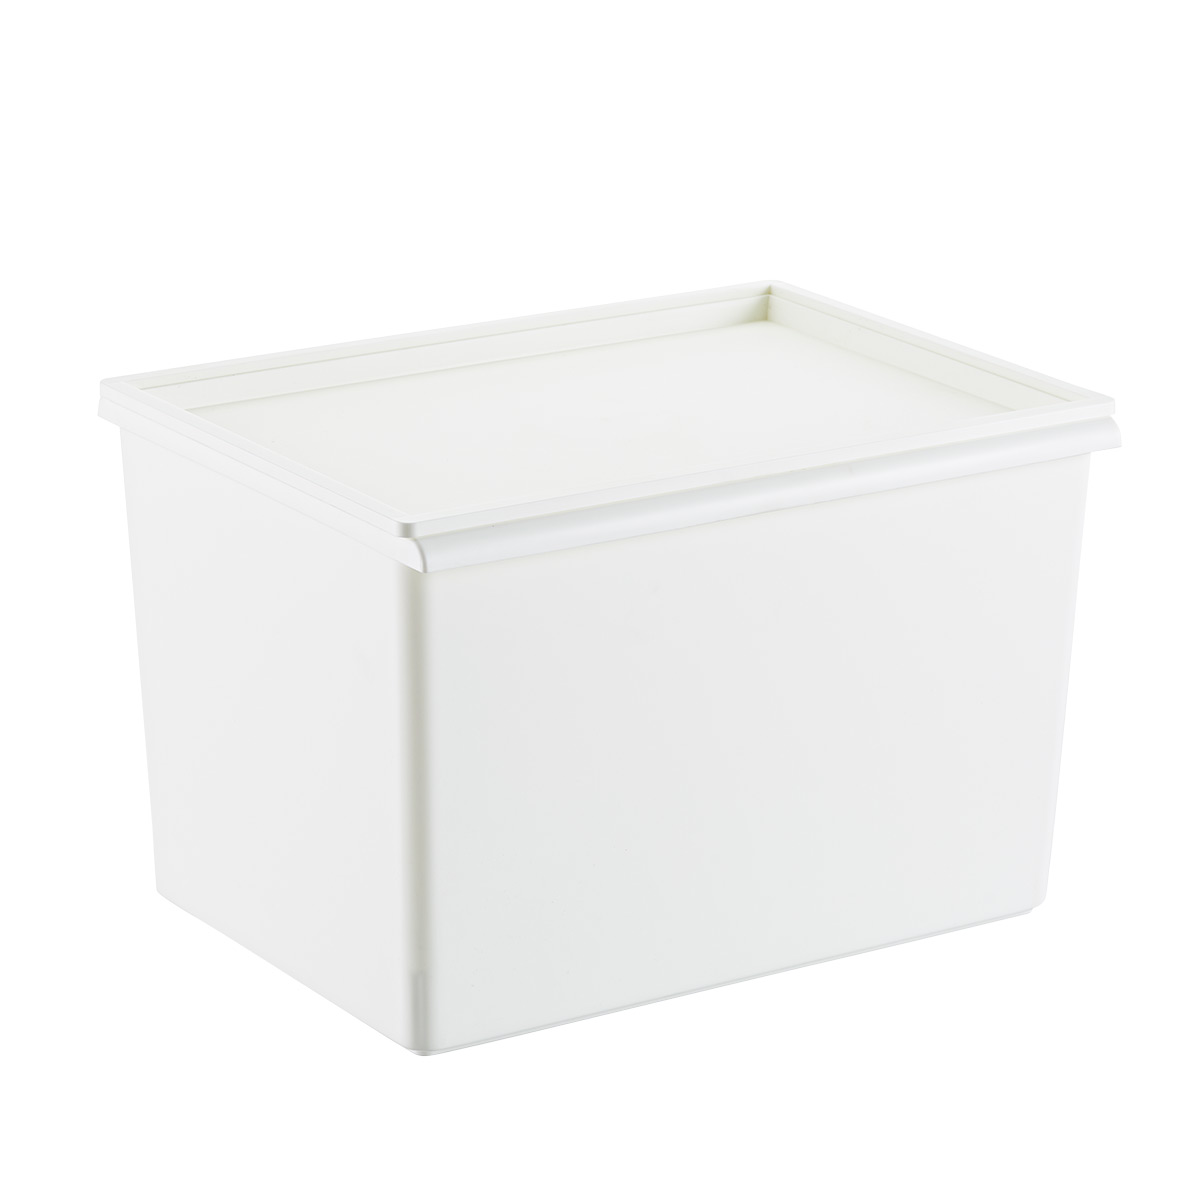 https://www.containerstore.com/catalogimages/365056/10077704-plastic-bin-with-lid-white-.jpg